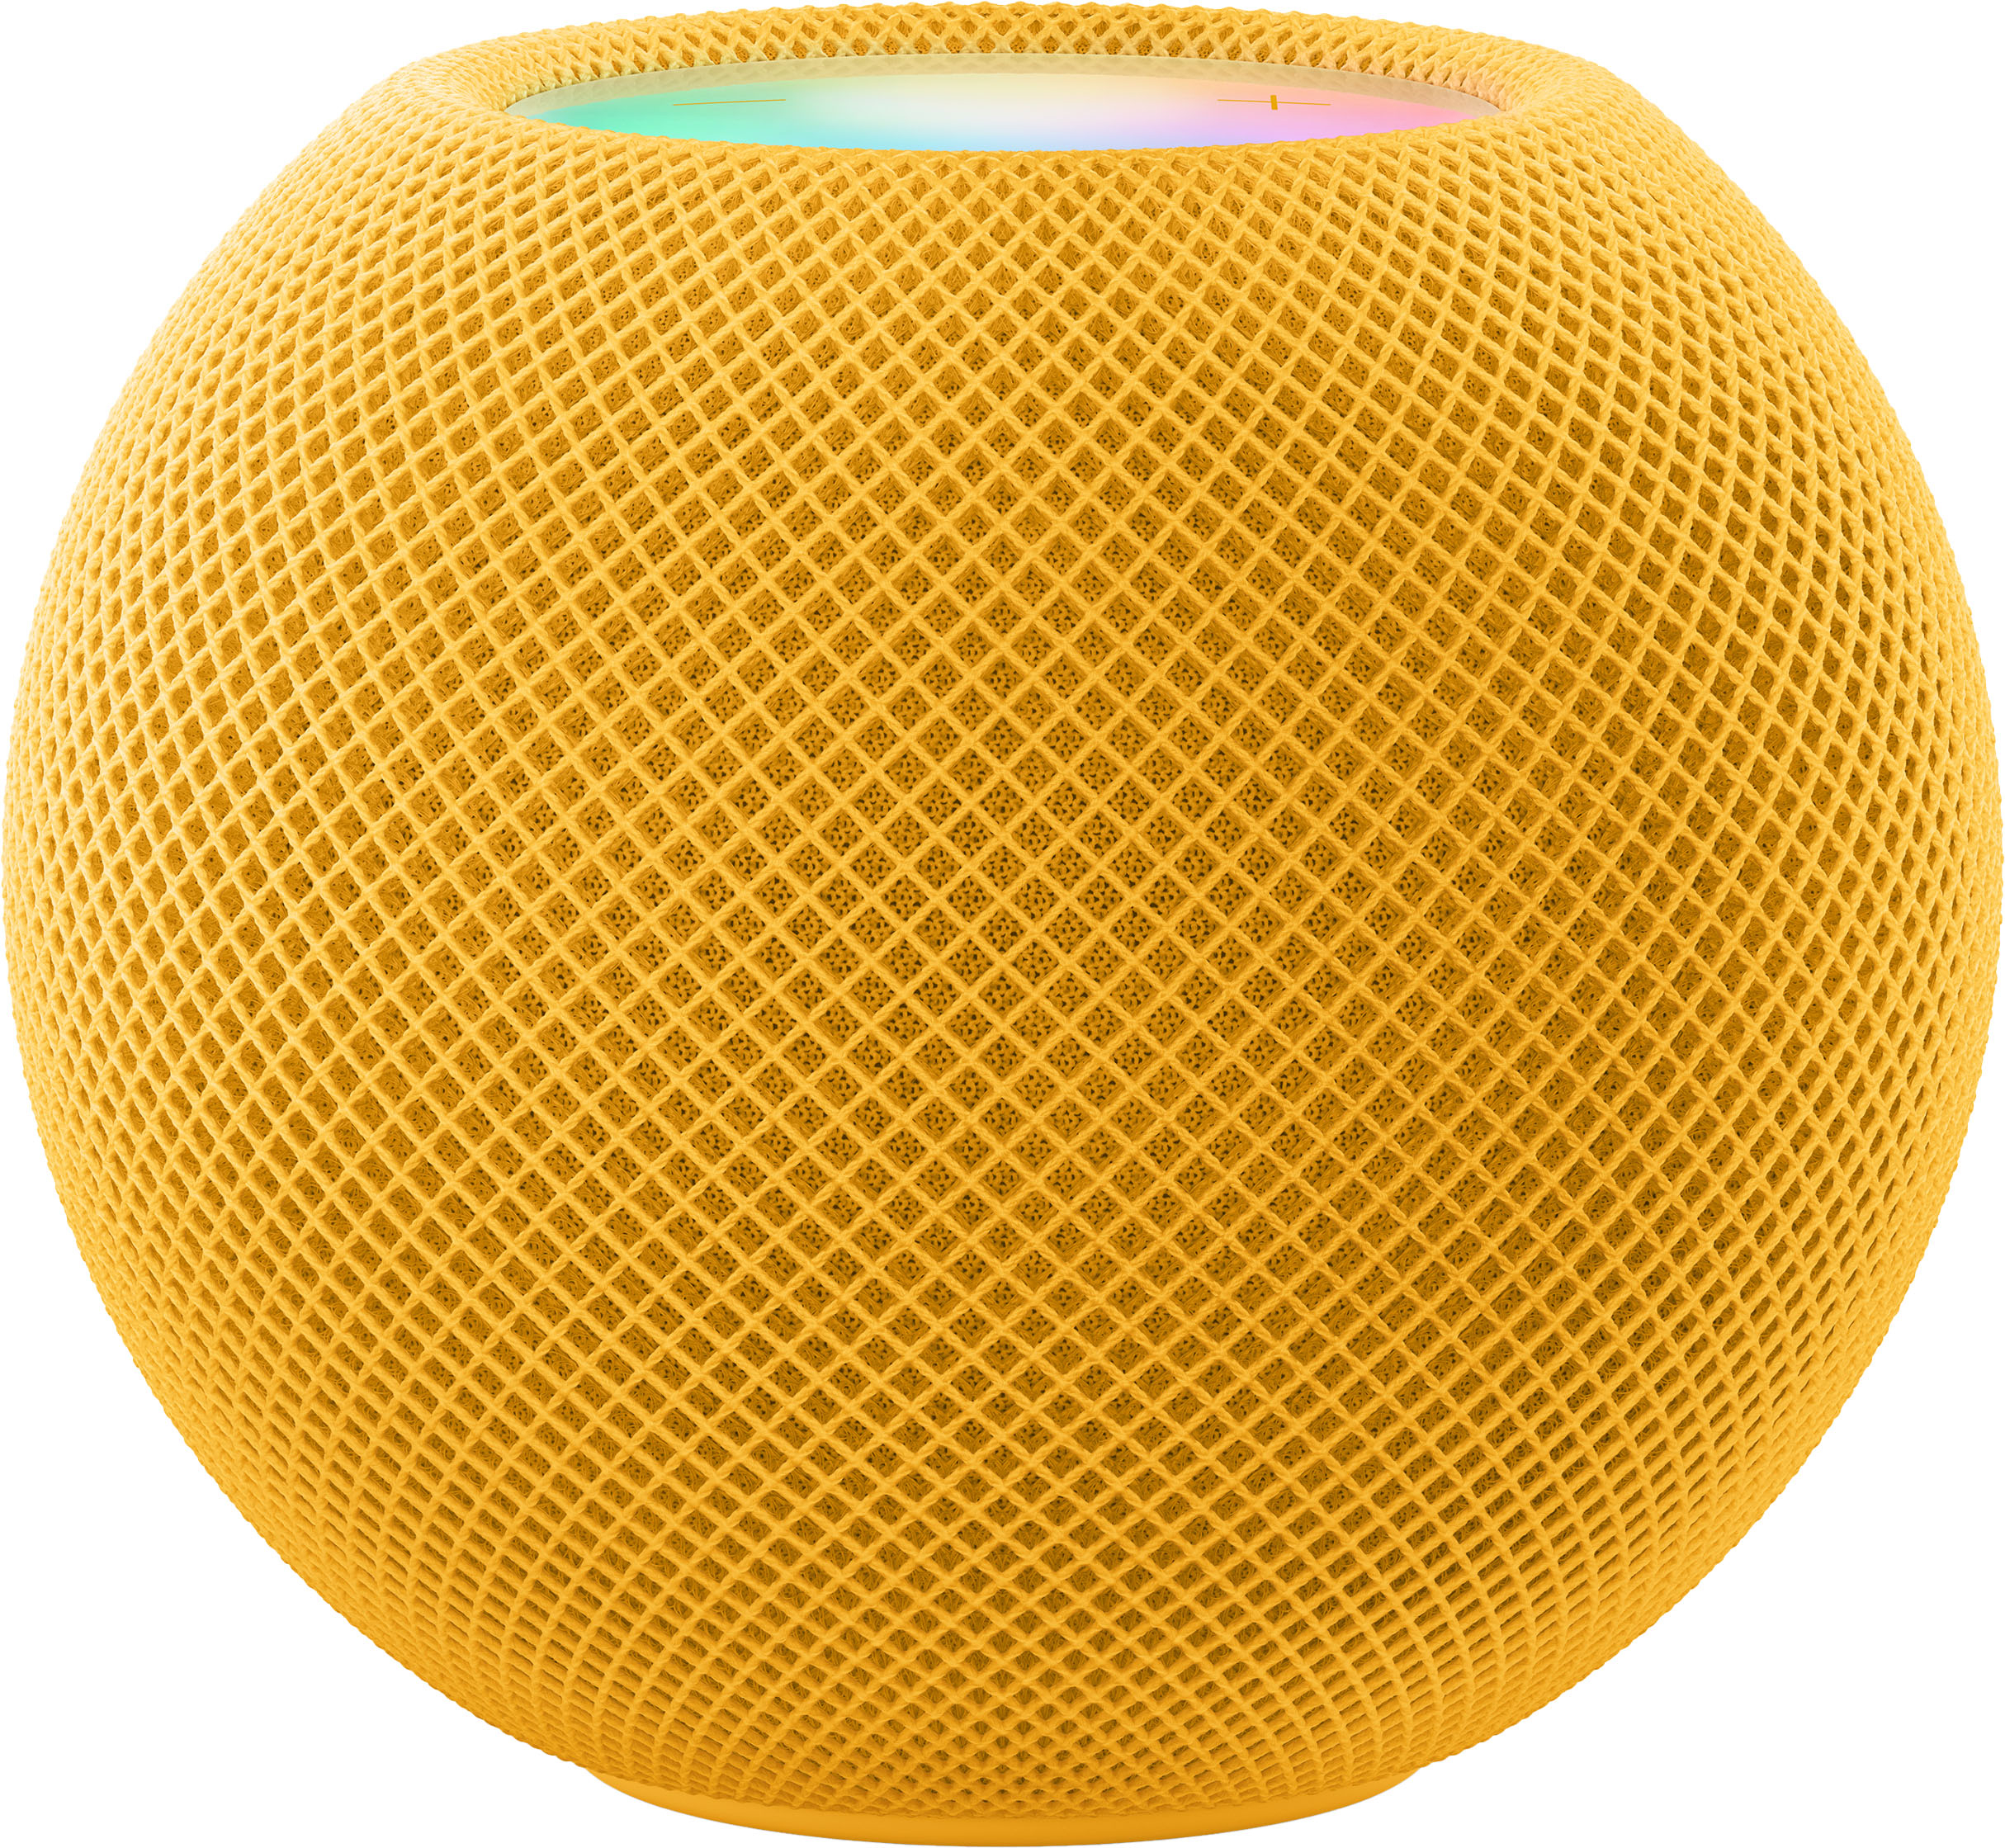 Hands-on with new HomePod mini colors [Video] - 9to5Mac